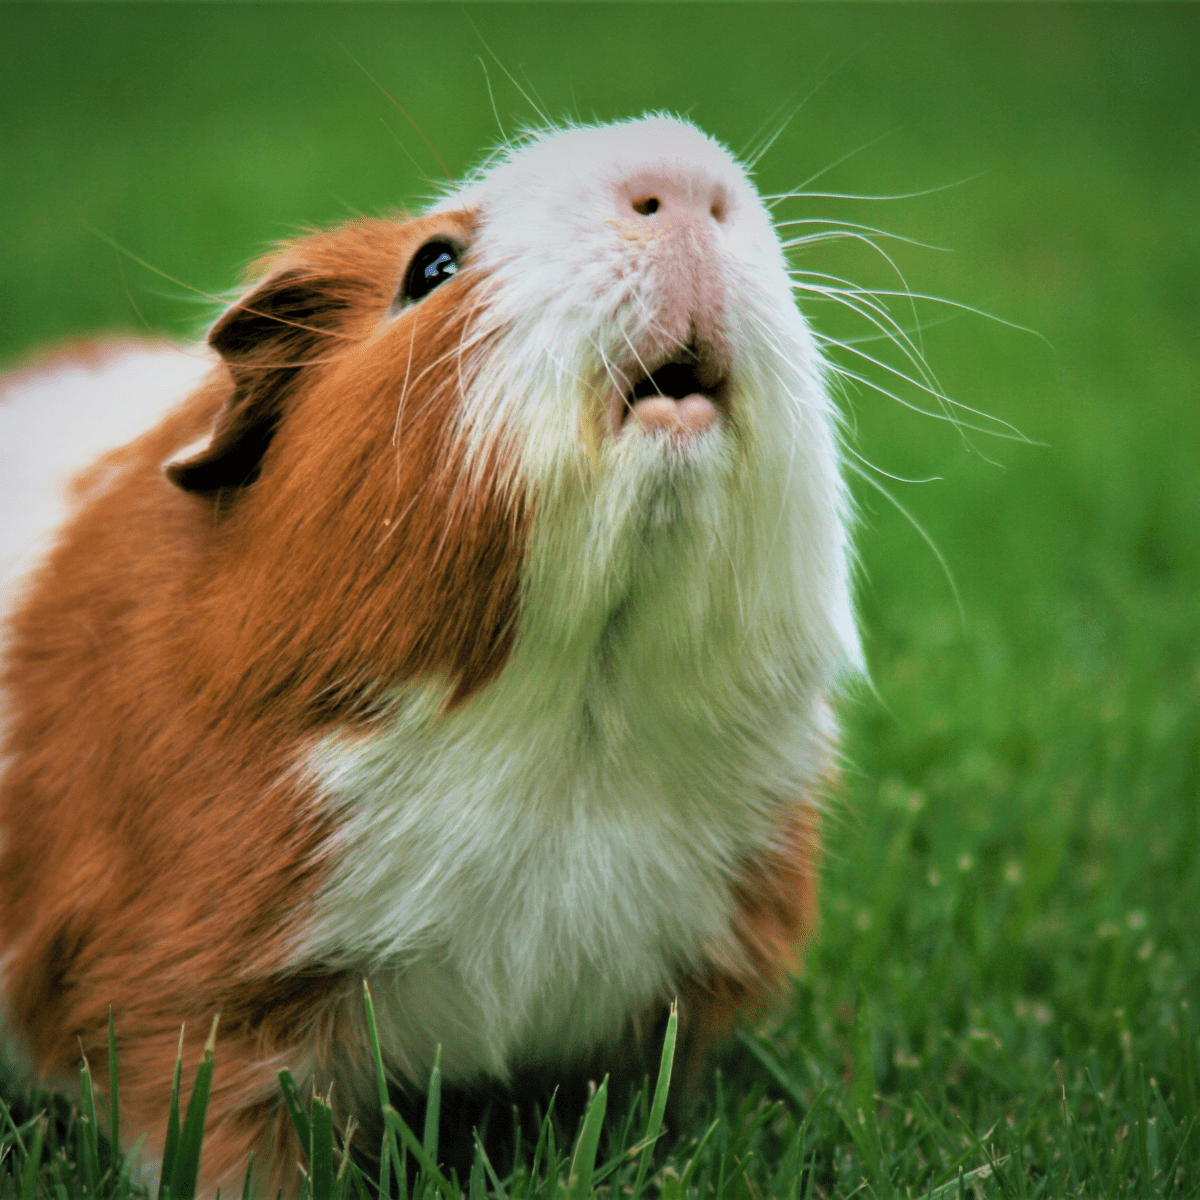 How To Choose And Care For Your Guinea Pig (Cavy), 49% OFF